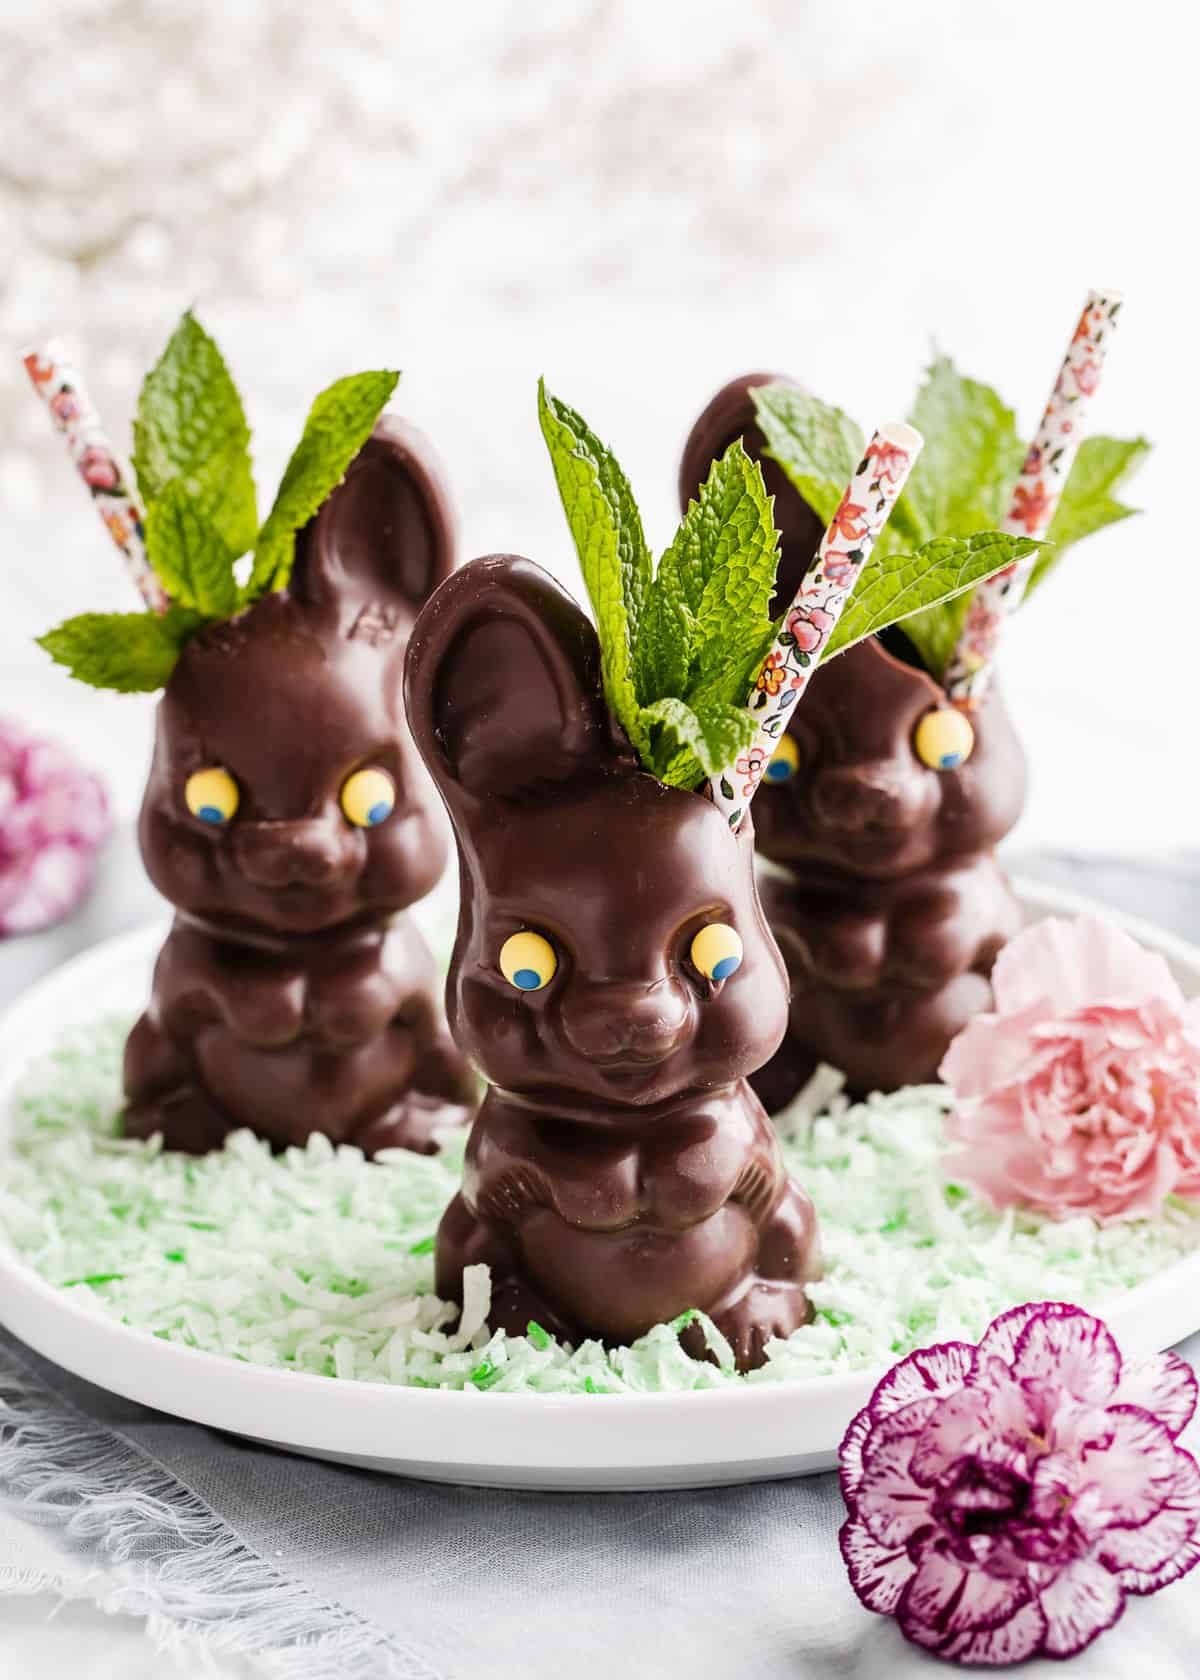 three chocolate bunnies used as drink cups with straws and mint leaves.